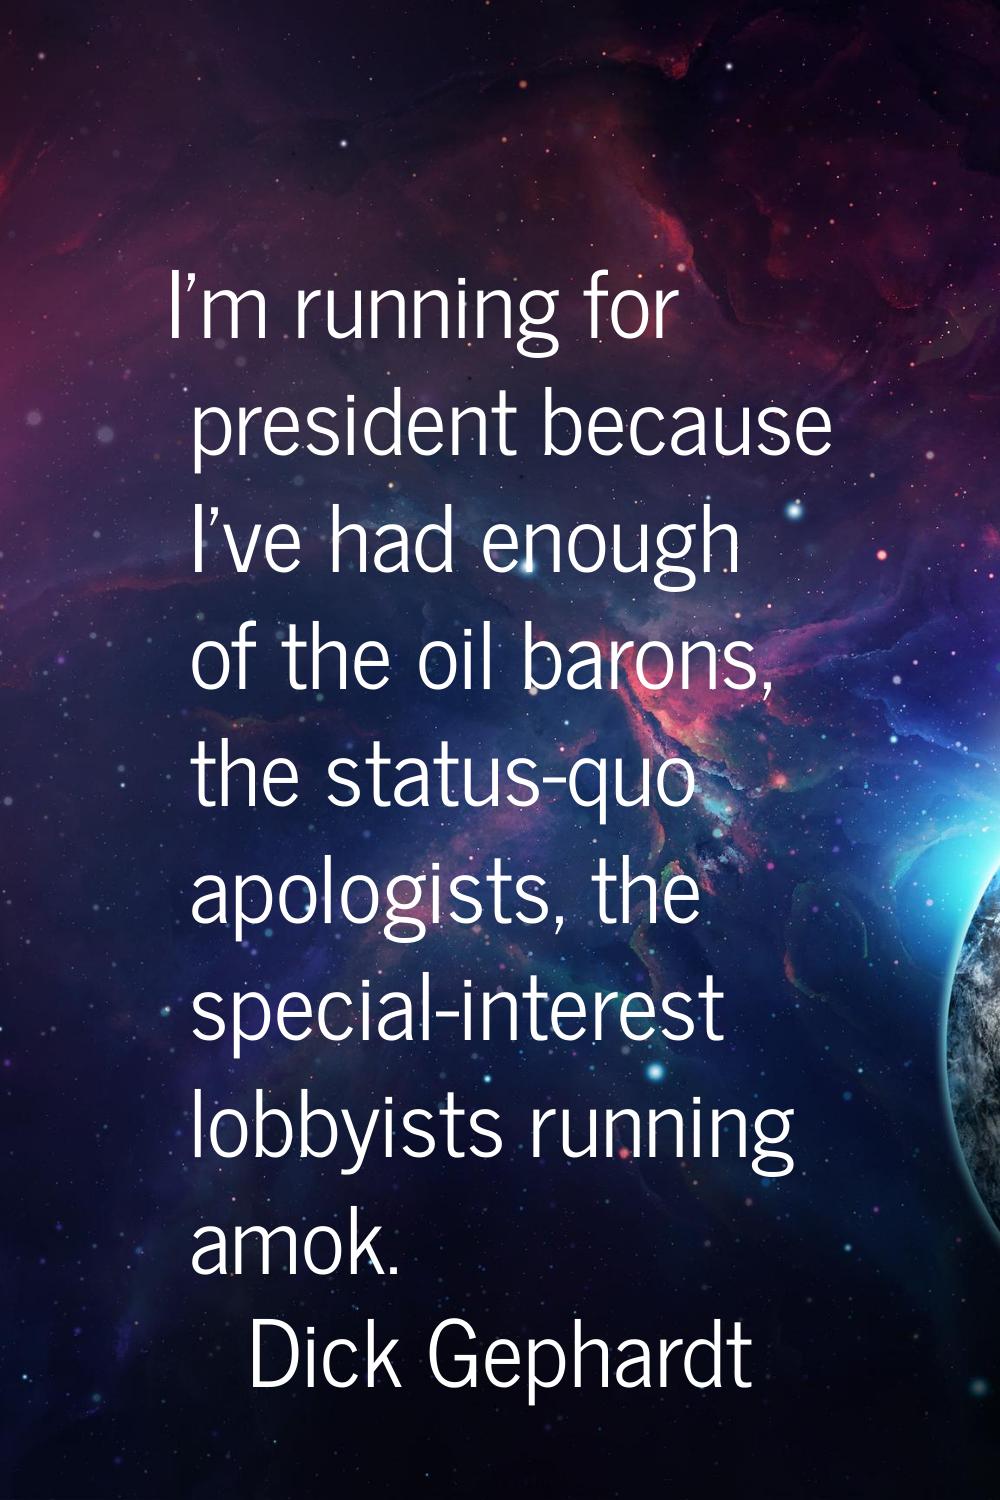 I'm running for president because I've had enough of the oil barons, the status-quo apologists, the